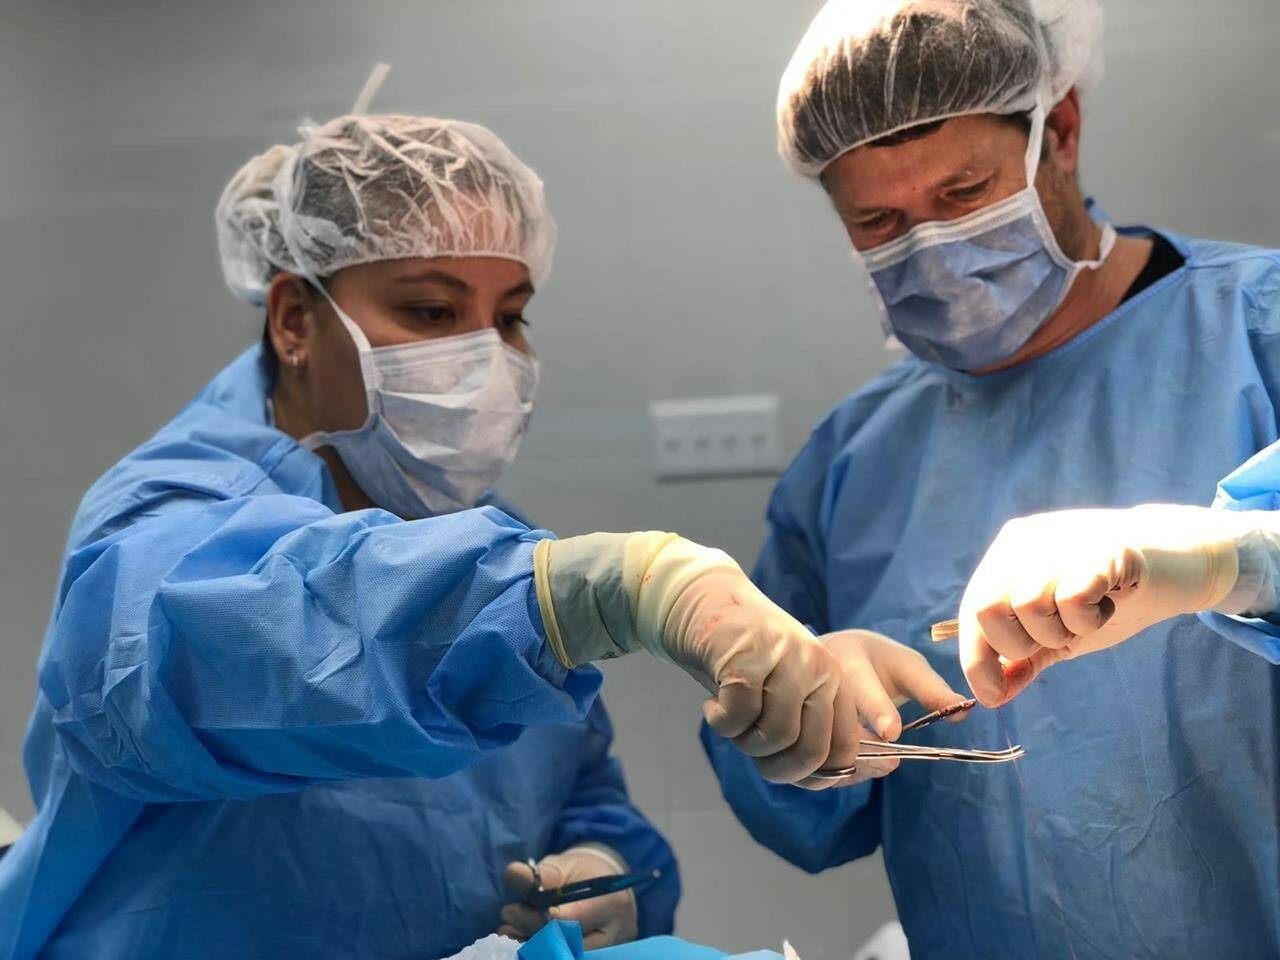 Physician assistant Joanna Chan, left, assists plastic surgeon Dr. Michel Gallant, right, with the placement of a skin graft to a child’s head during an operation in Port-au-Prince, Haiti, in a 2018 handout photo. Chan was part of a medical team with the organization Team Broken Earth. THE CANADIAN PRESS/HO-Team Broken Earth